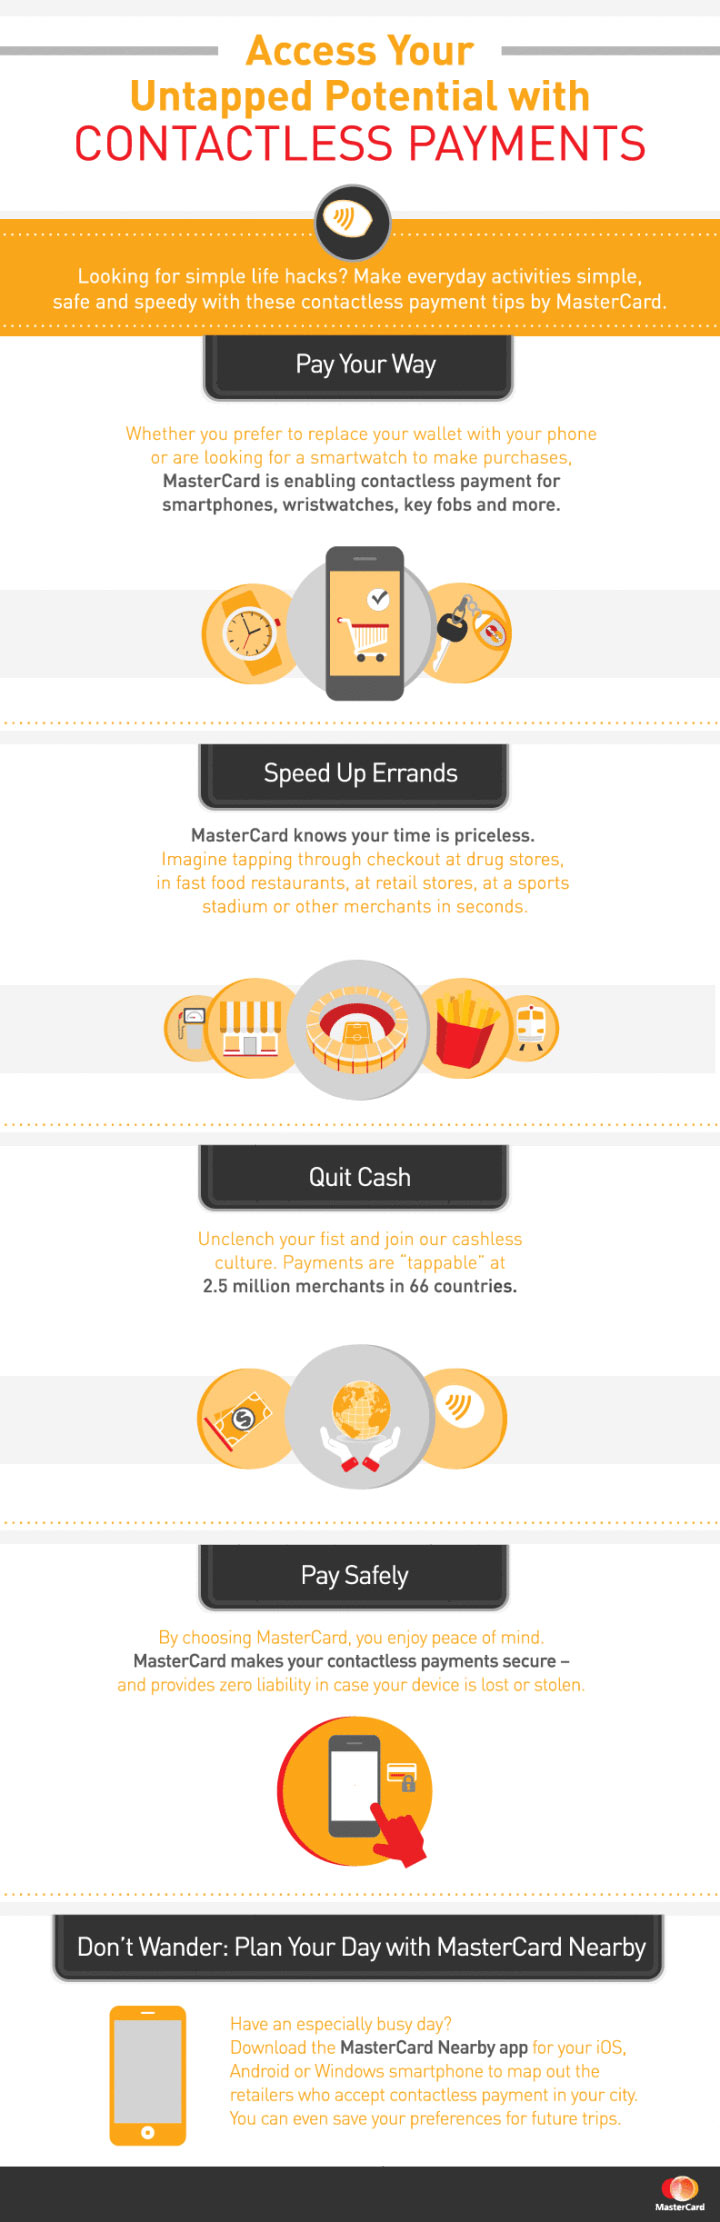 Contactless payment benefits infographic